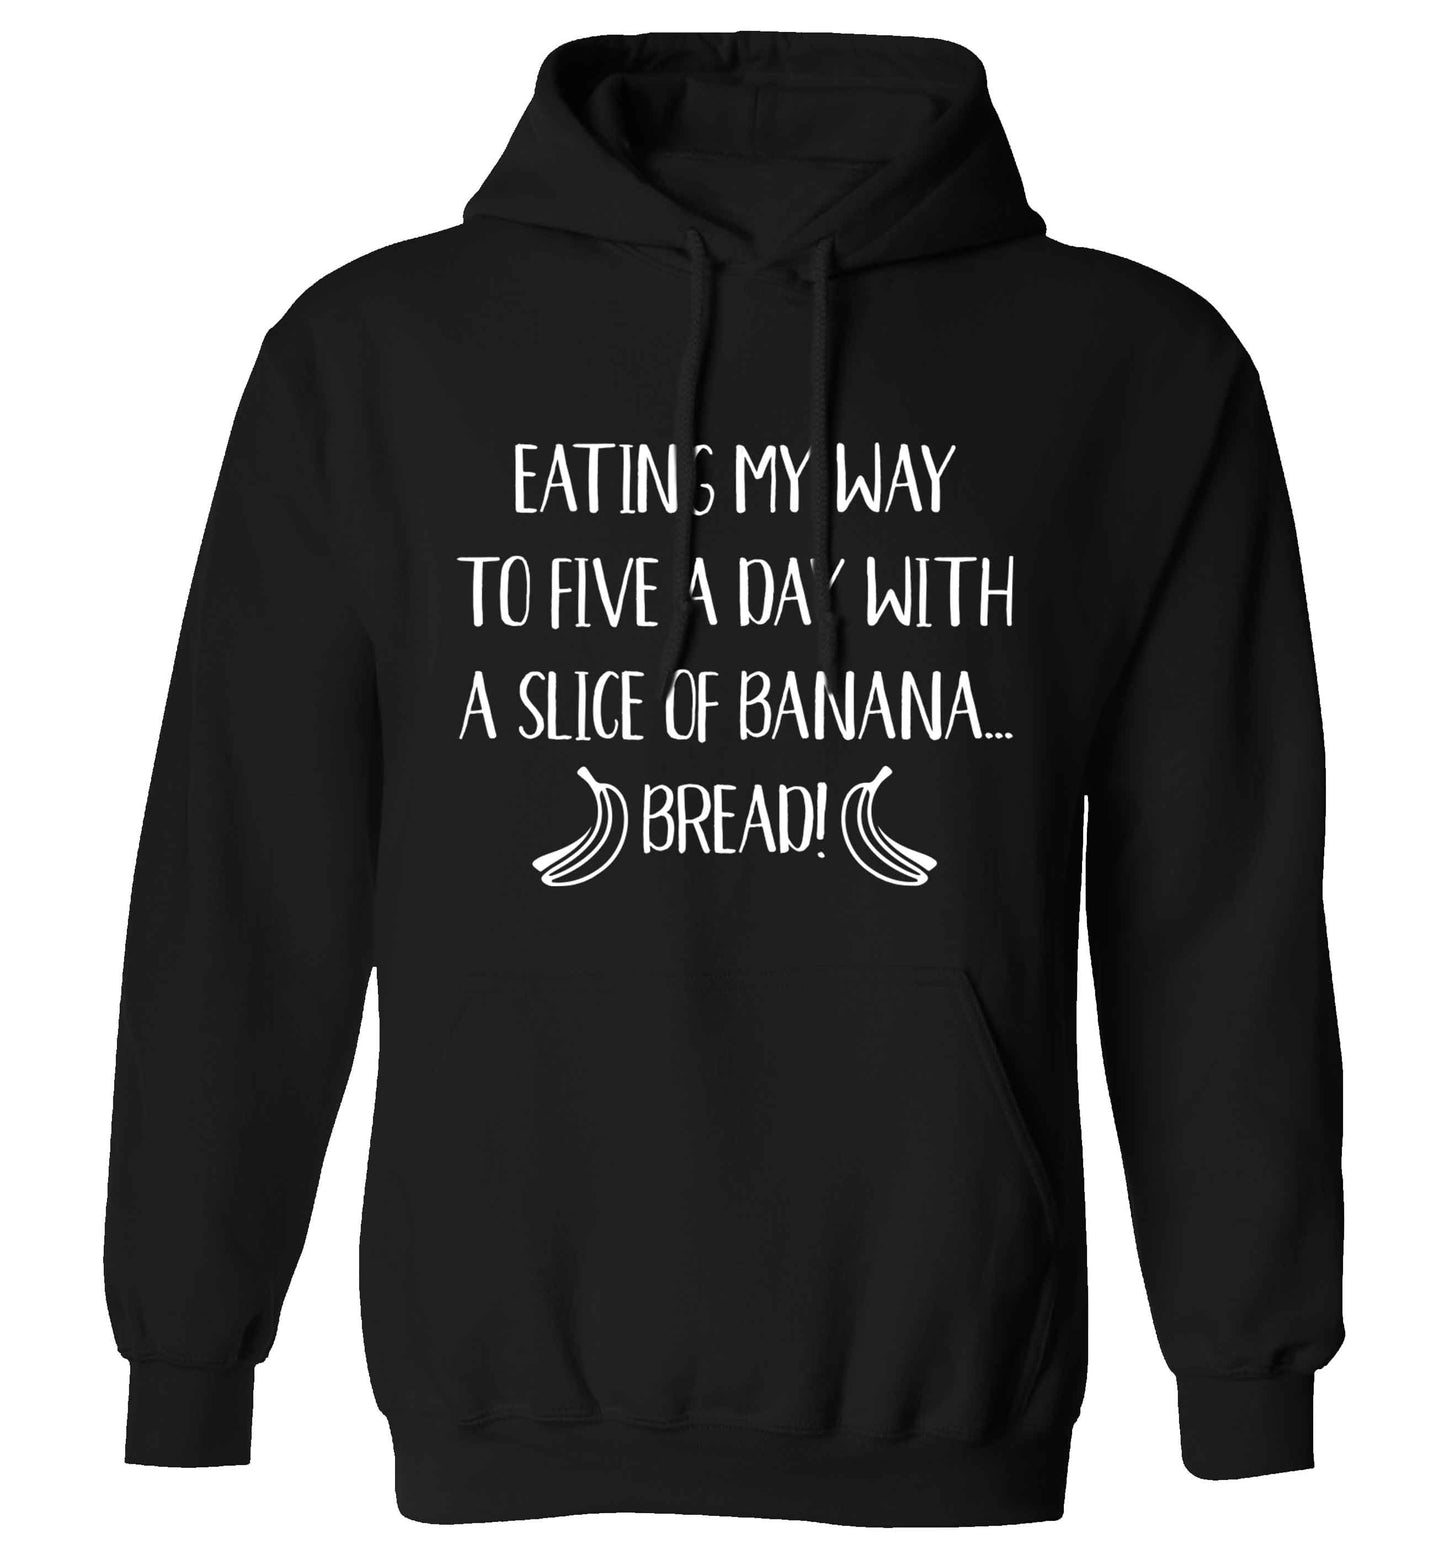 Eating my way to five a day with a slice of banana bread adults unisex black hoodie 2XL